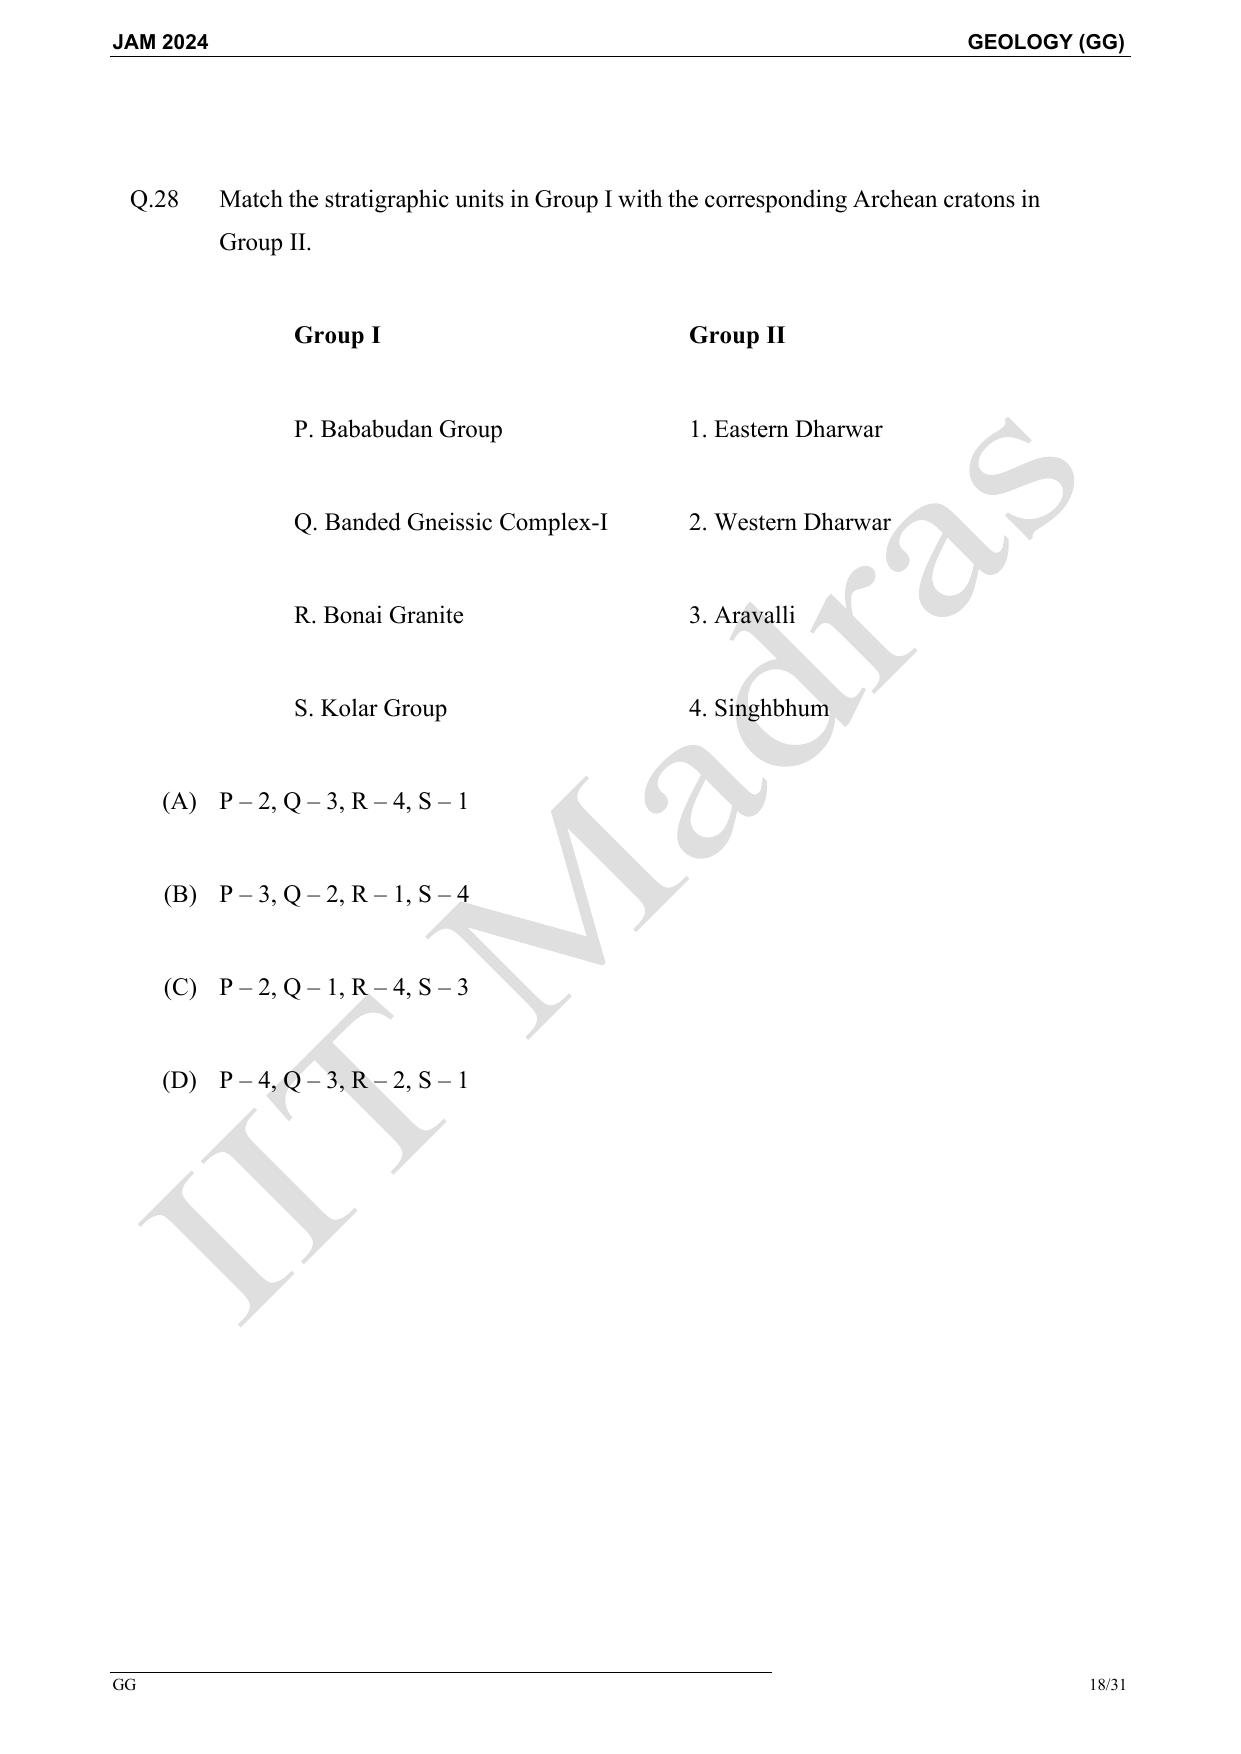 IIT JAM 2024 Geology (GG) Master Question Paper - Page 18